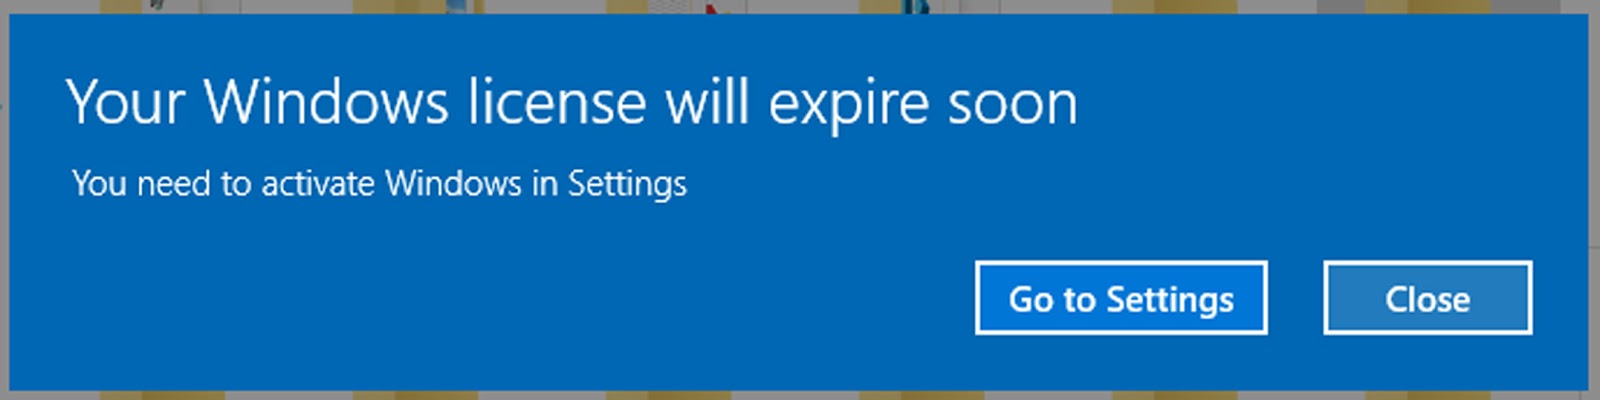 Your Windows license will expire soon solved 100%